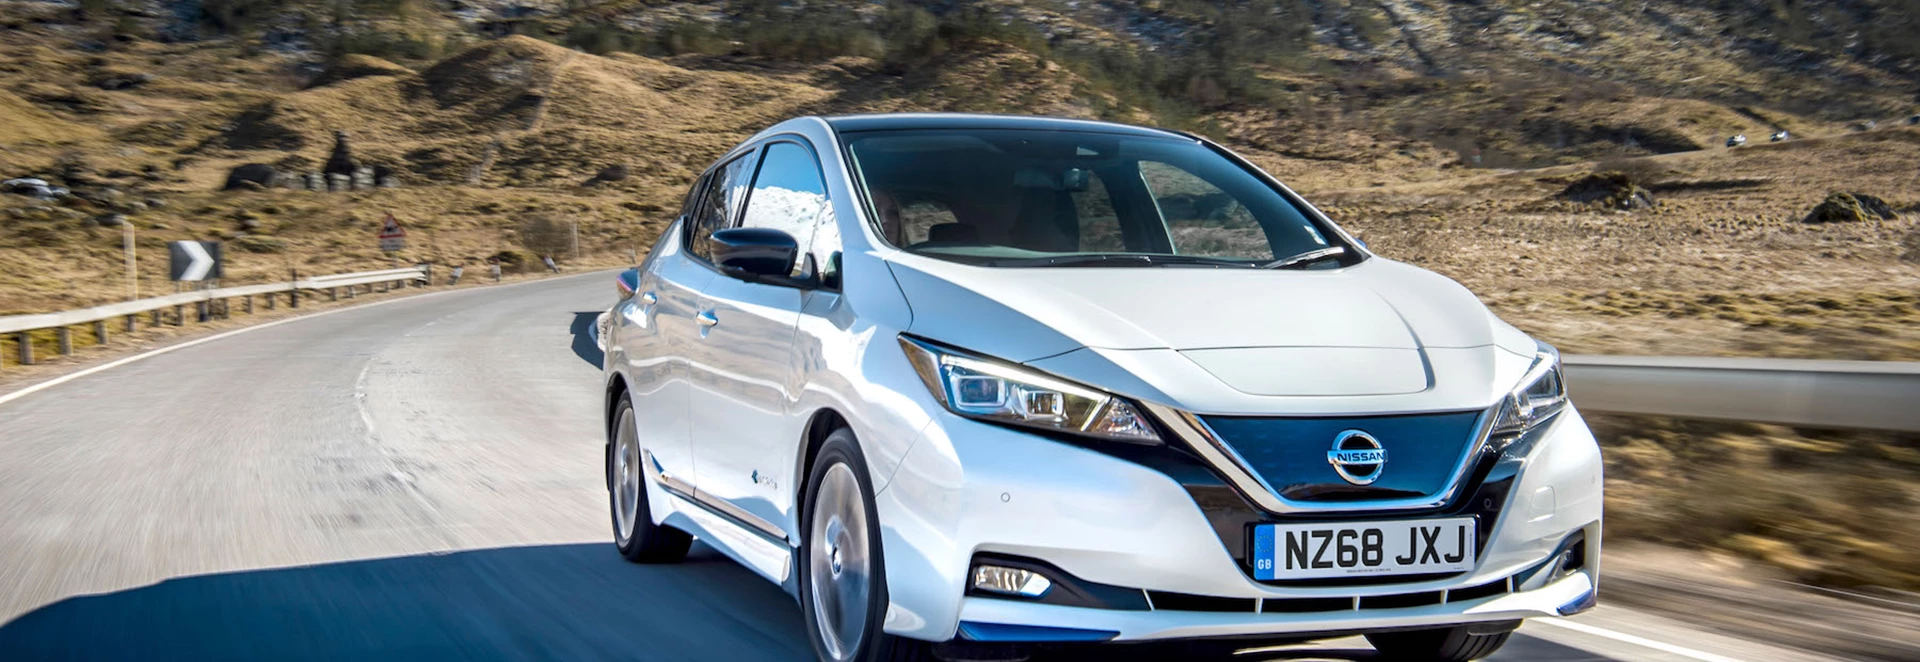 Nissan cuts the price of Nissan Leaf EV by £1,650 